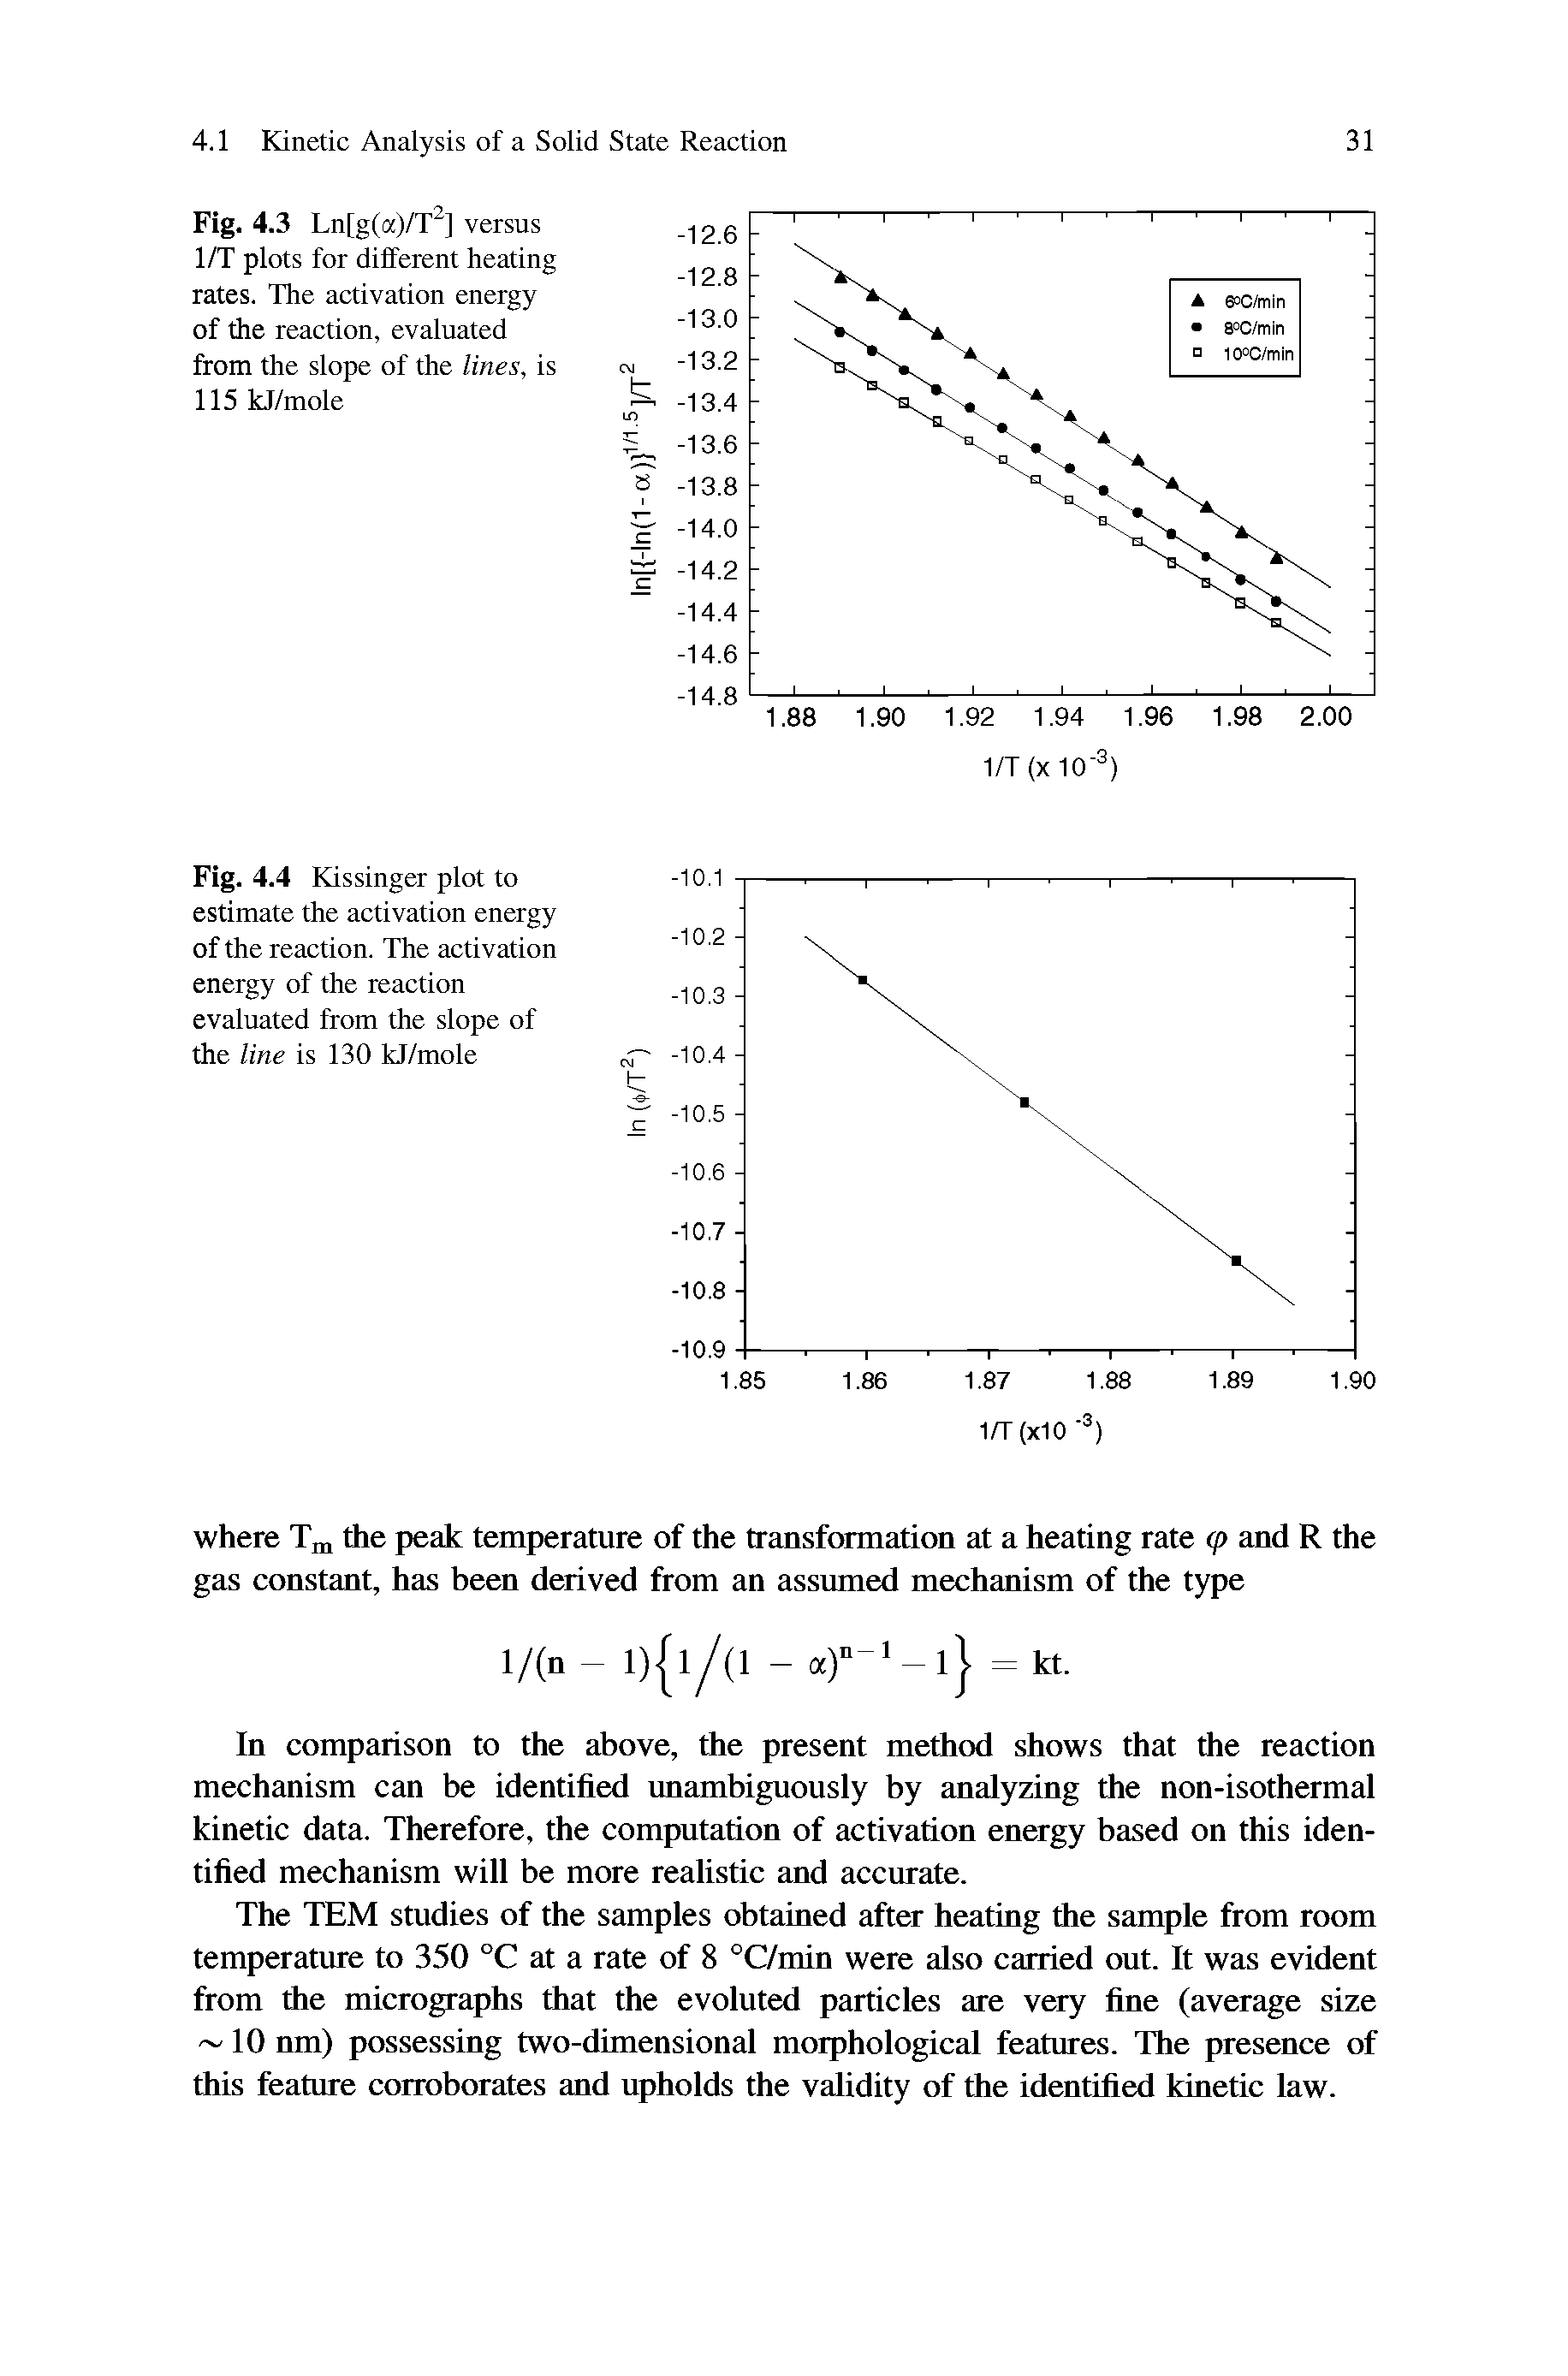 Fig. 4.4 Kissinger plot to estimate the activation energy of the reaction. The activation energy of the reaction evaluated from the slope of the line is 130 kJ/mole...